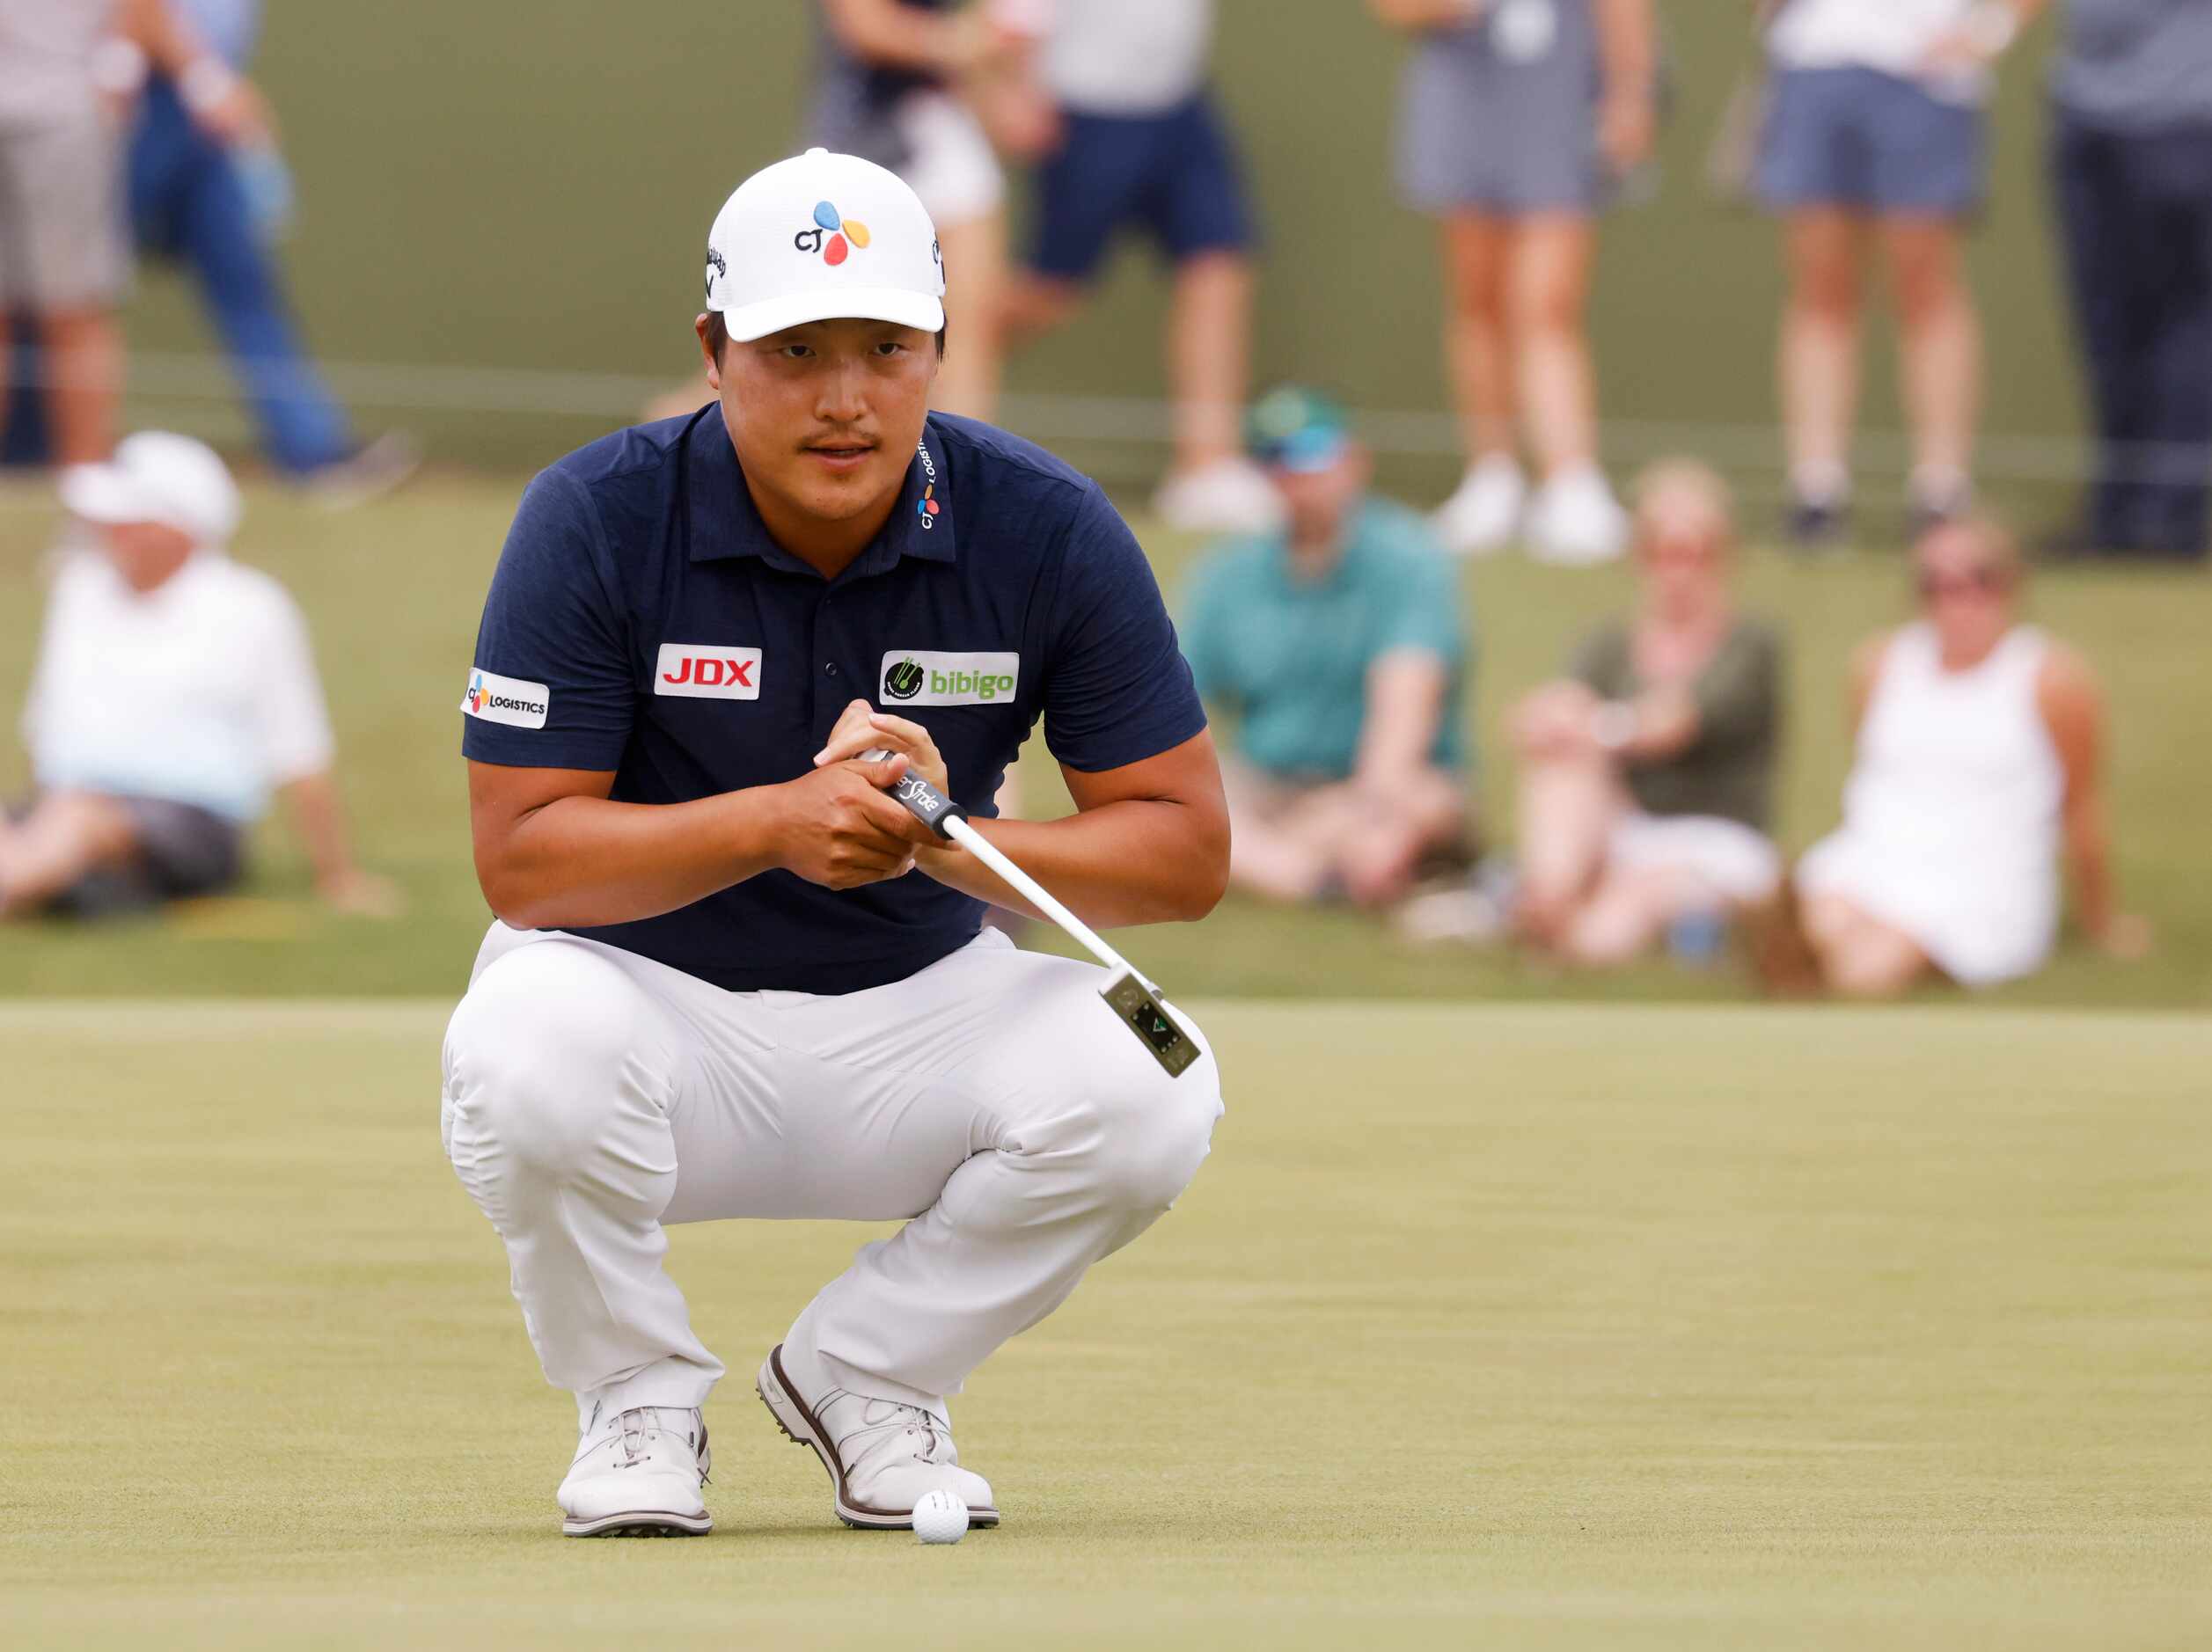 Kyoung-Hoon Lee lines up his putt on the 16th hole during round 3 of the AT&T Byron Nelson ...